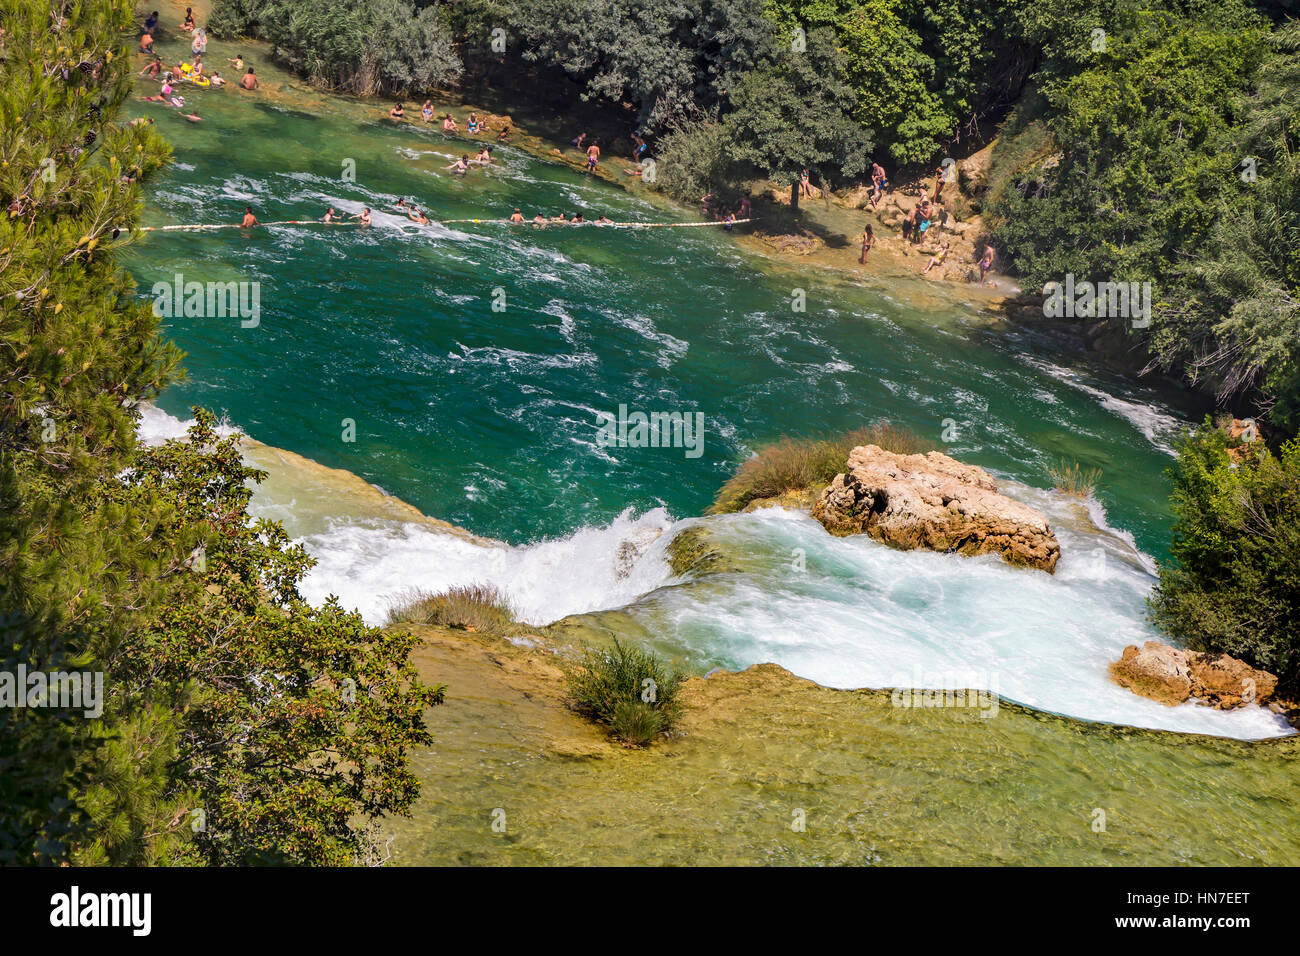 Many tourists  swim  in the Krka River in the Krka National Park in Croatia. This is one of the most famous national parks in the country, which in th Stock Photo